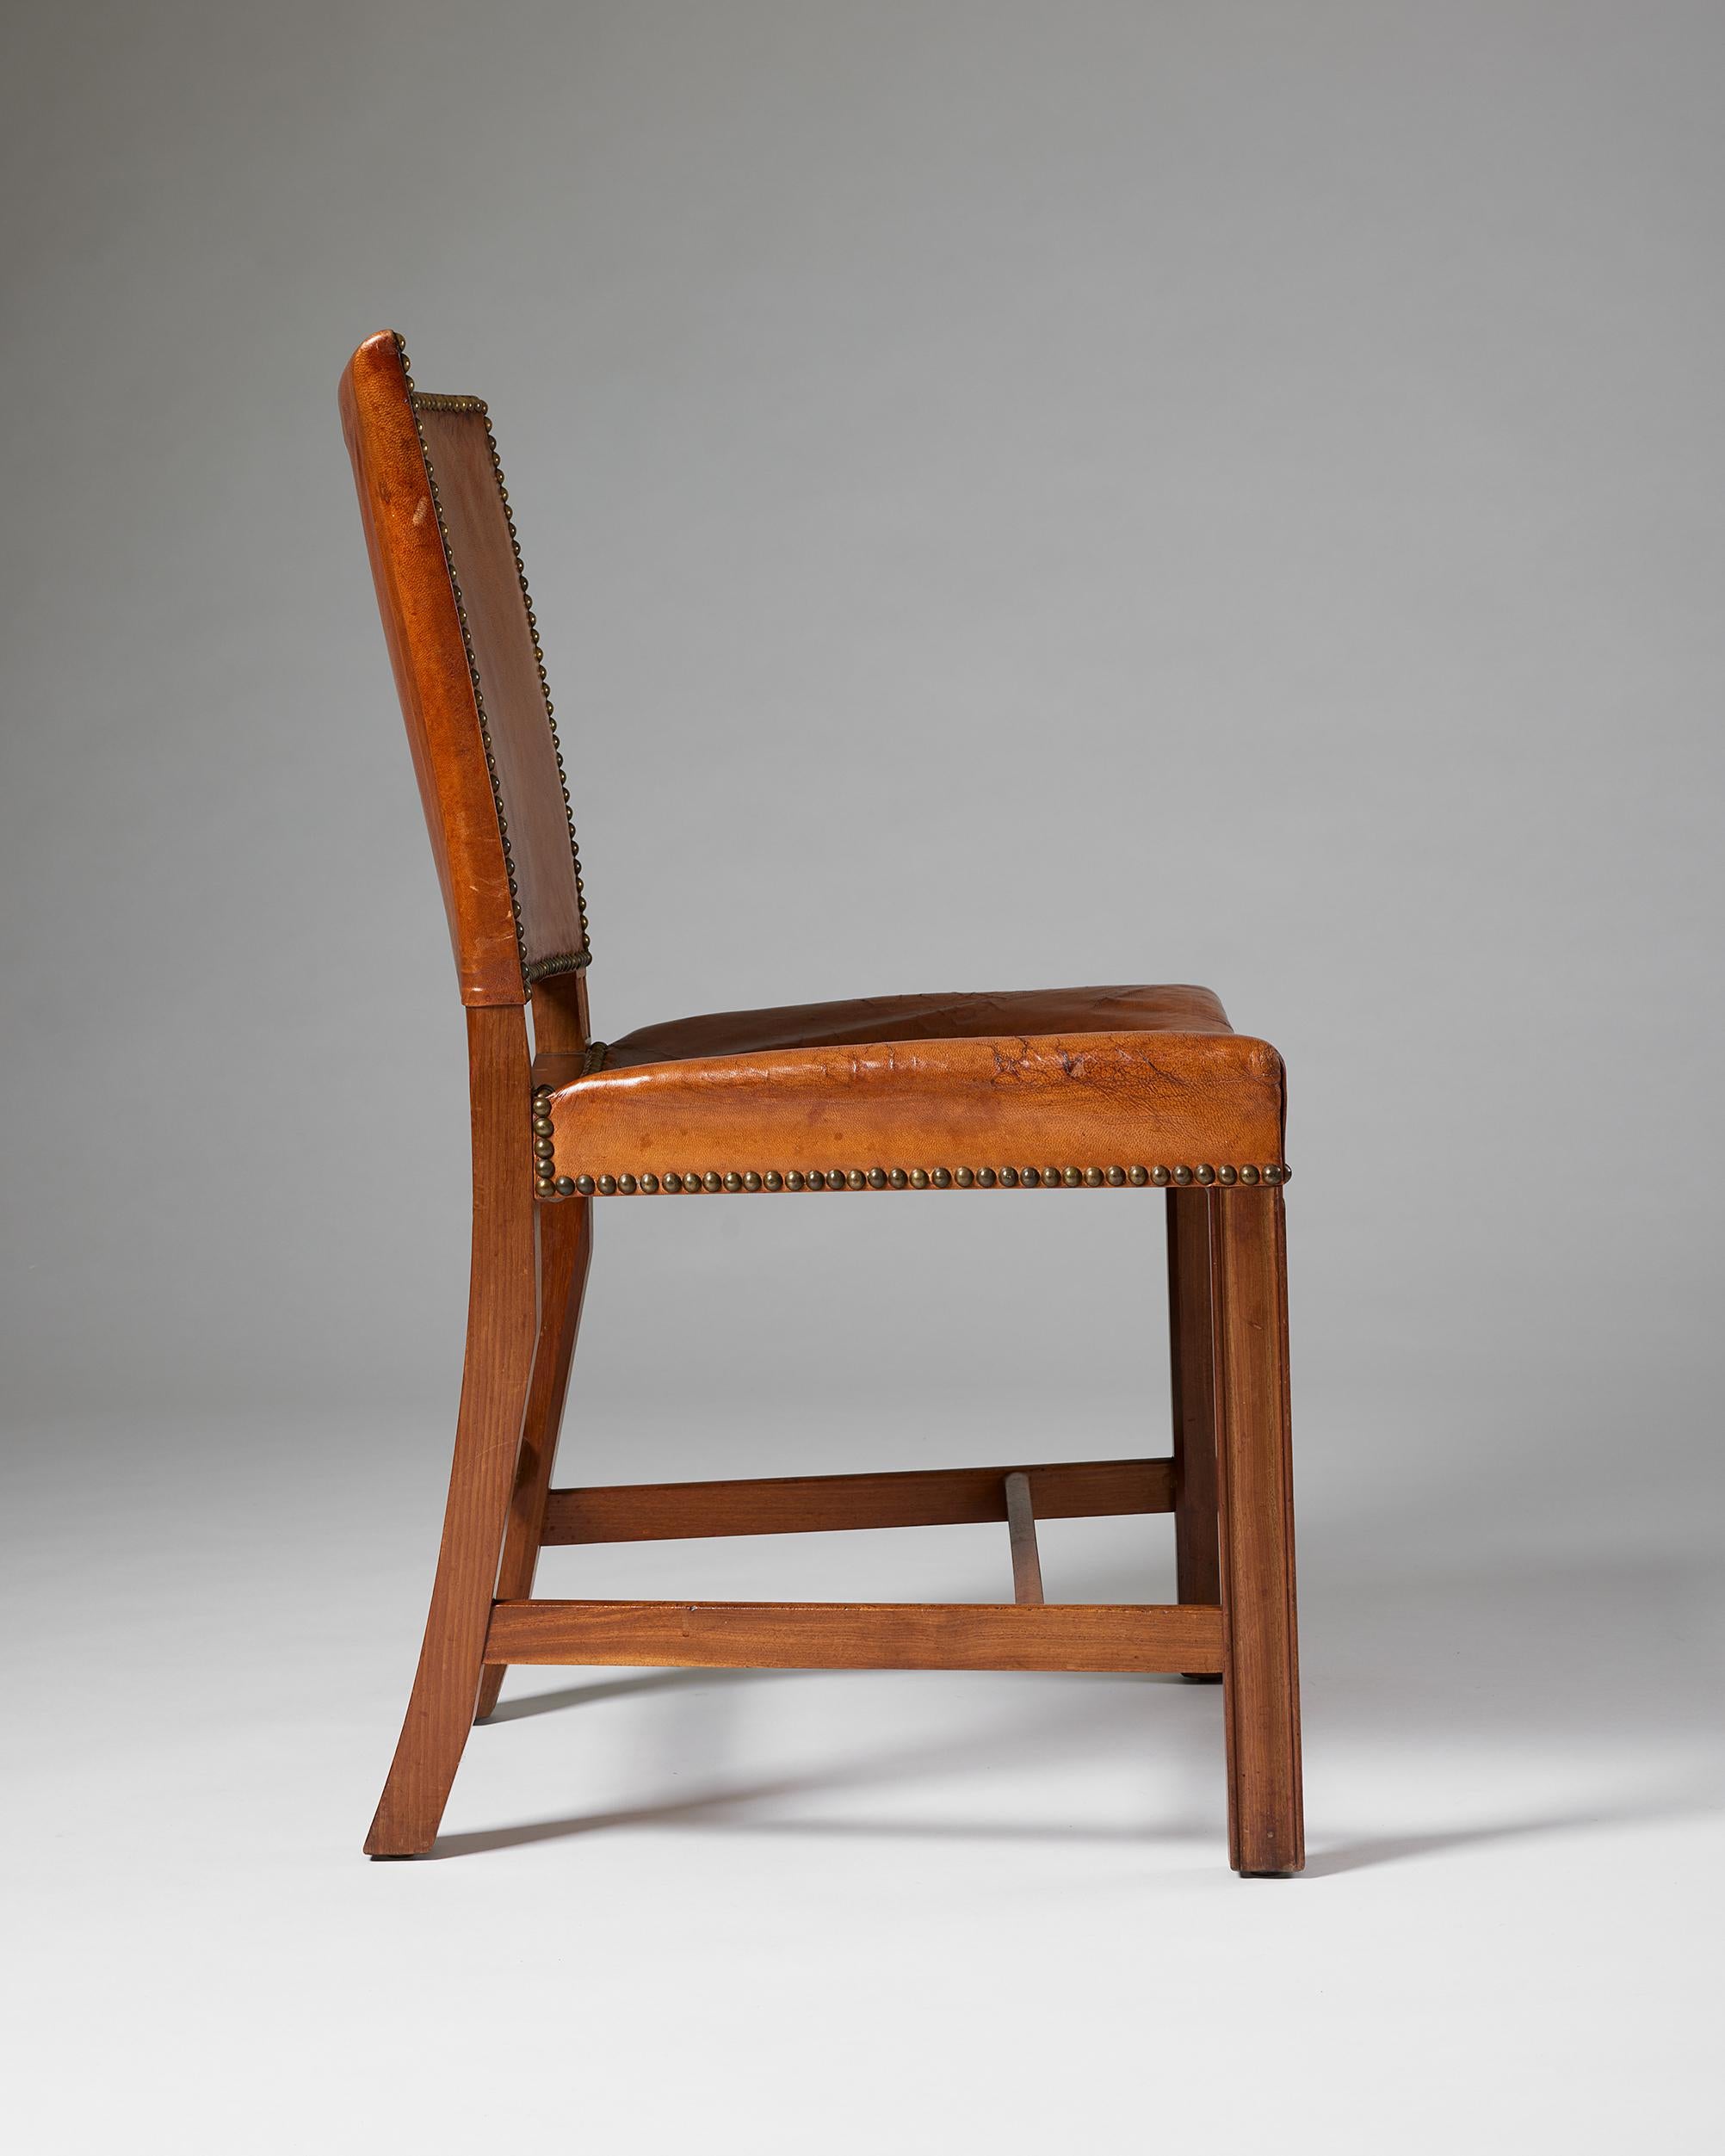 Mahogany ‘the Red Chair’ Model 3758 Designed by Kaare Klint for Rud. Rasmussen Fabrik